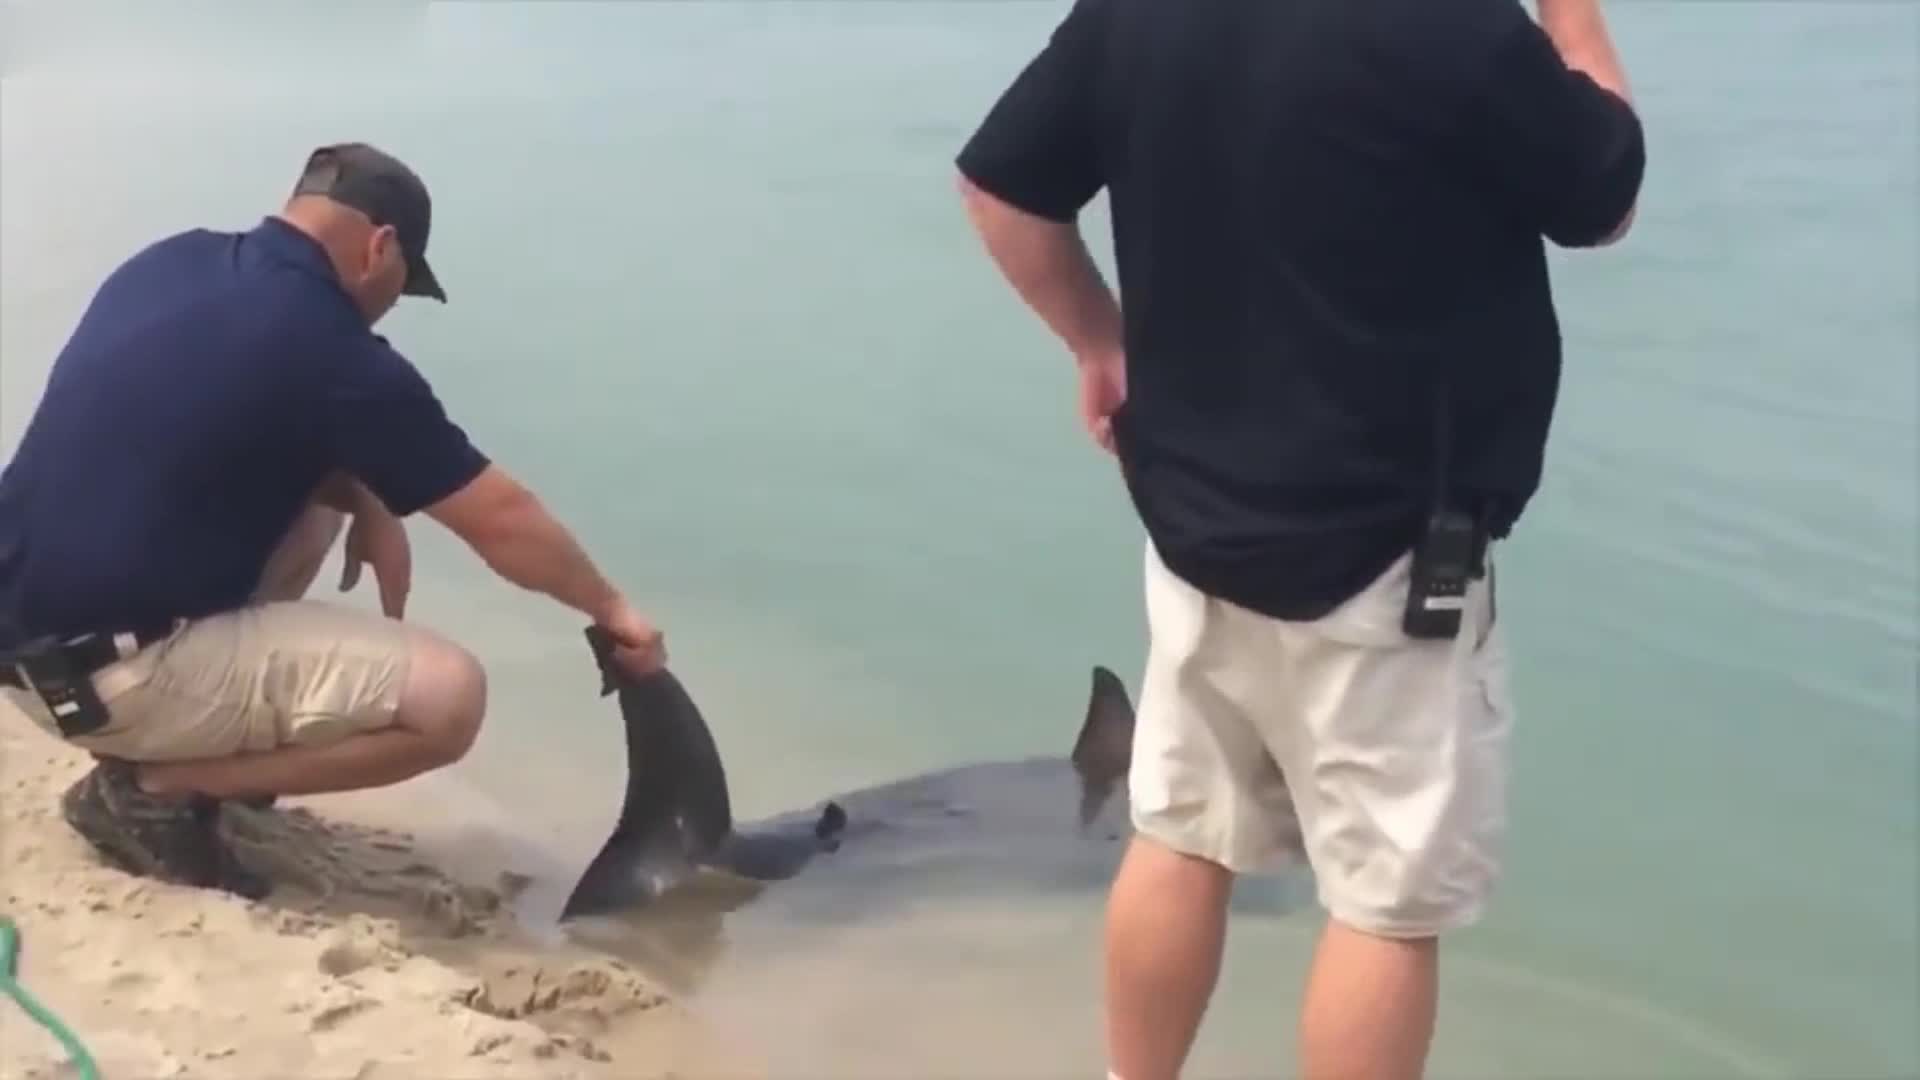 Sharks stranded on the beach dying, passers-by kept scooping water for rescue, blood vessels opened wide mouth and people cheered.